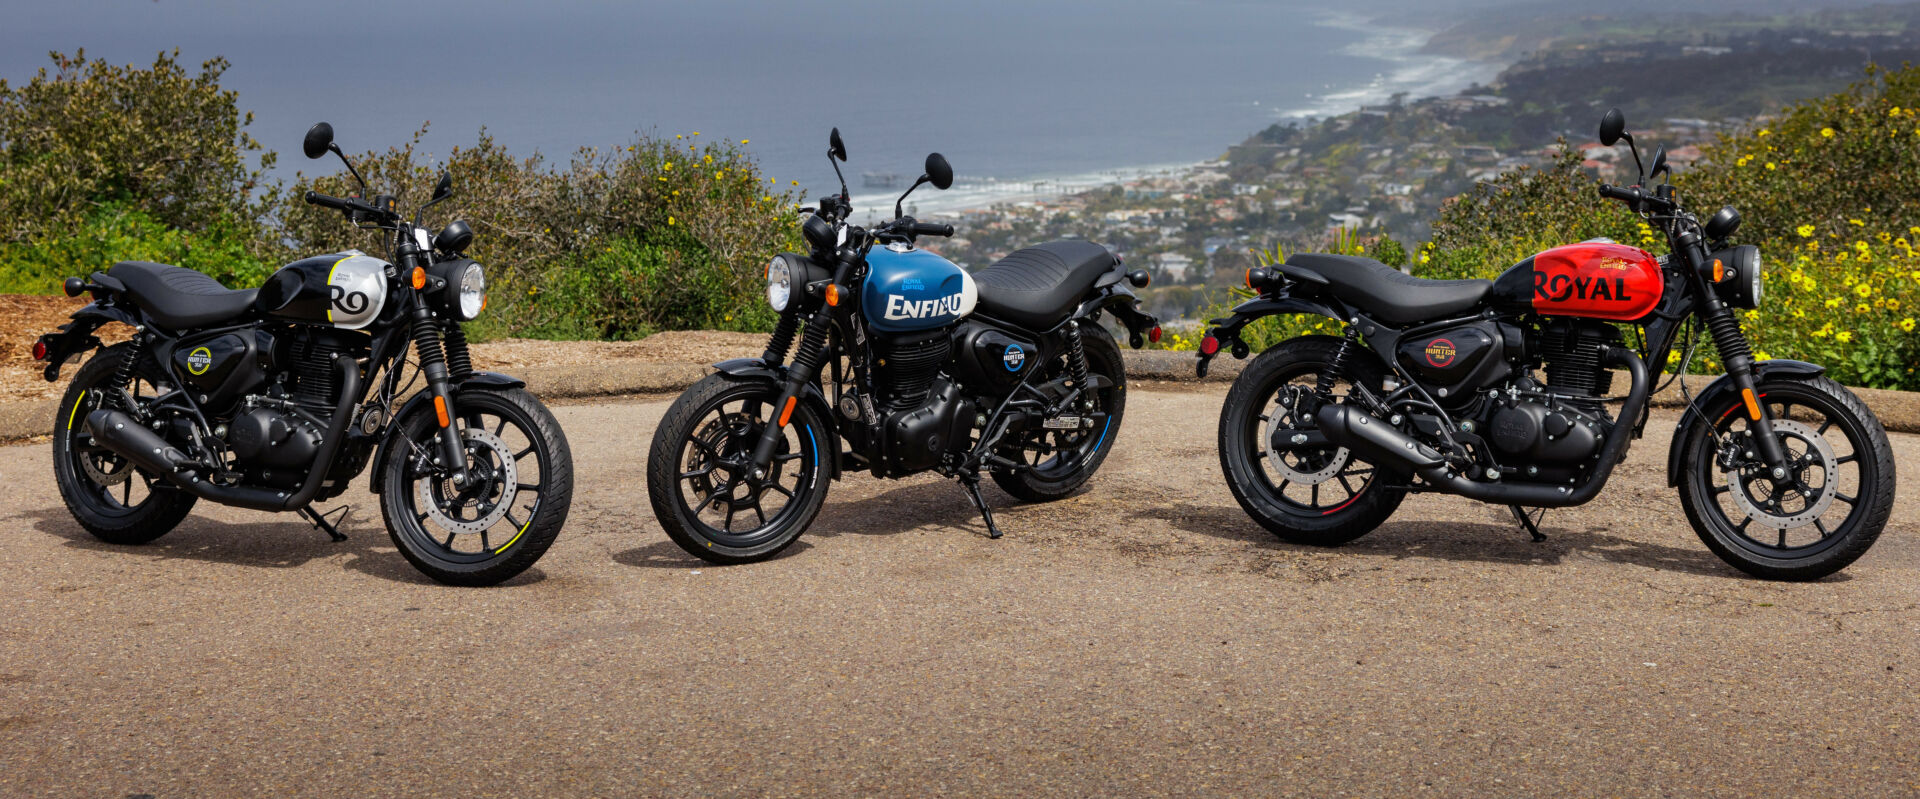 The new Hunter 350 is one of the models Royal Enfield is offering to riding schools at special prices. Photo courtesy Royal Enfield North America.